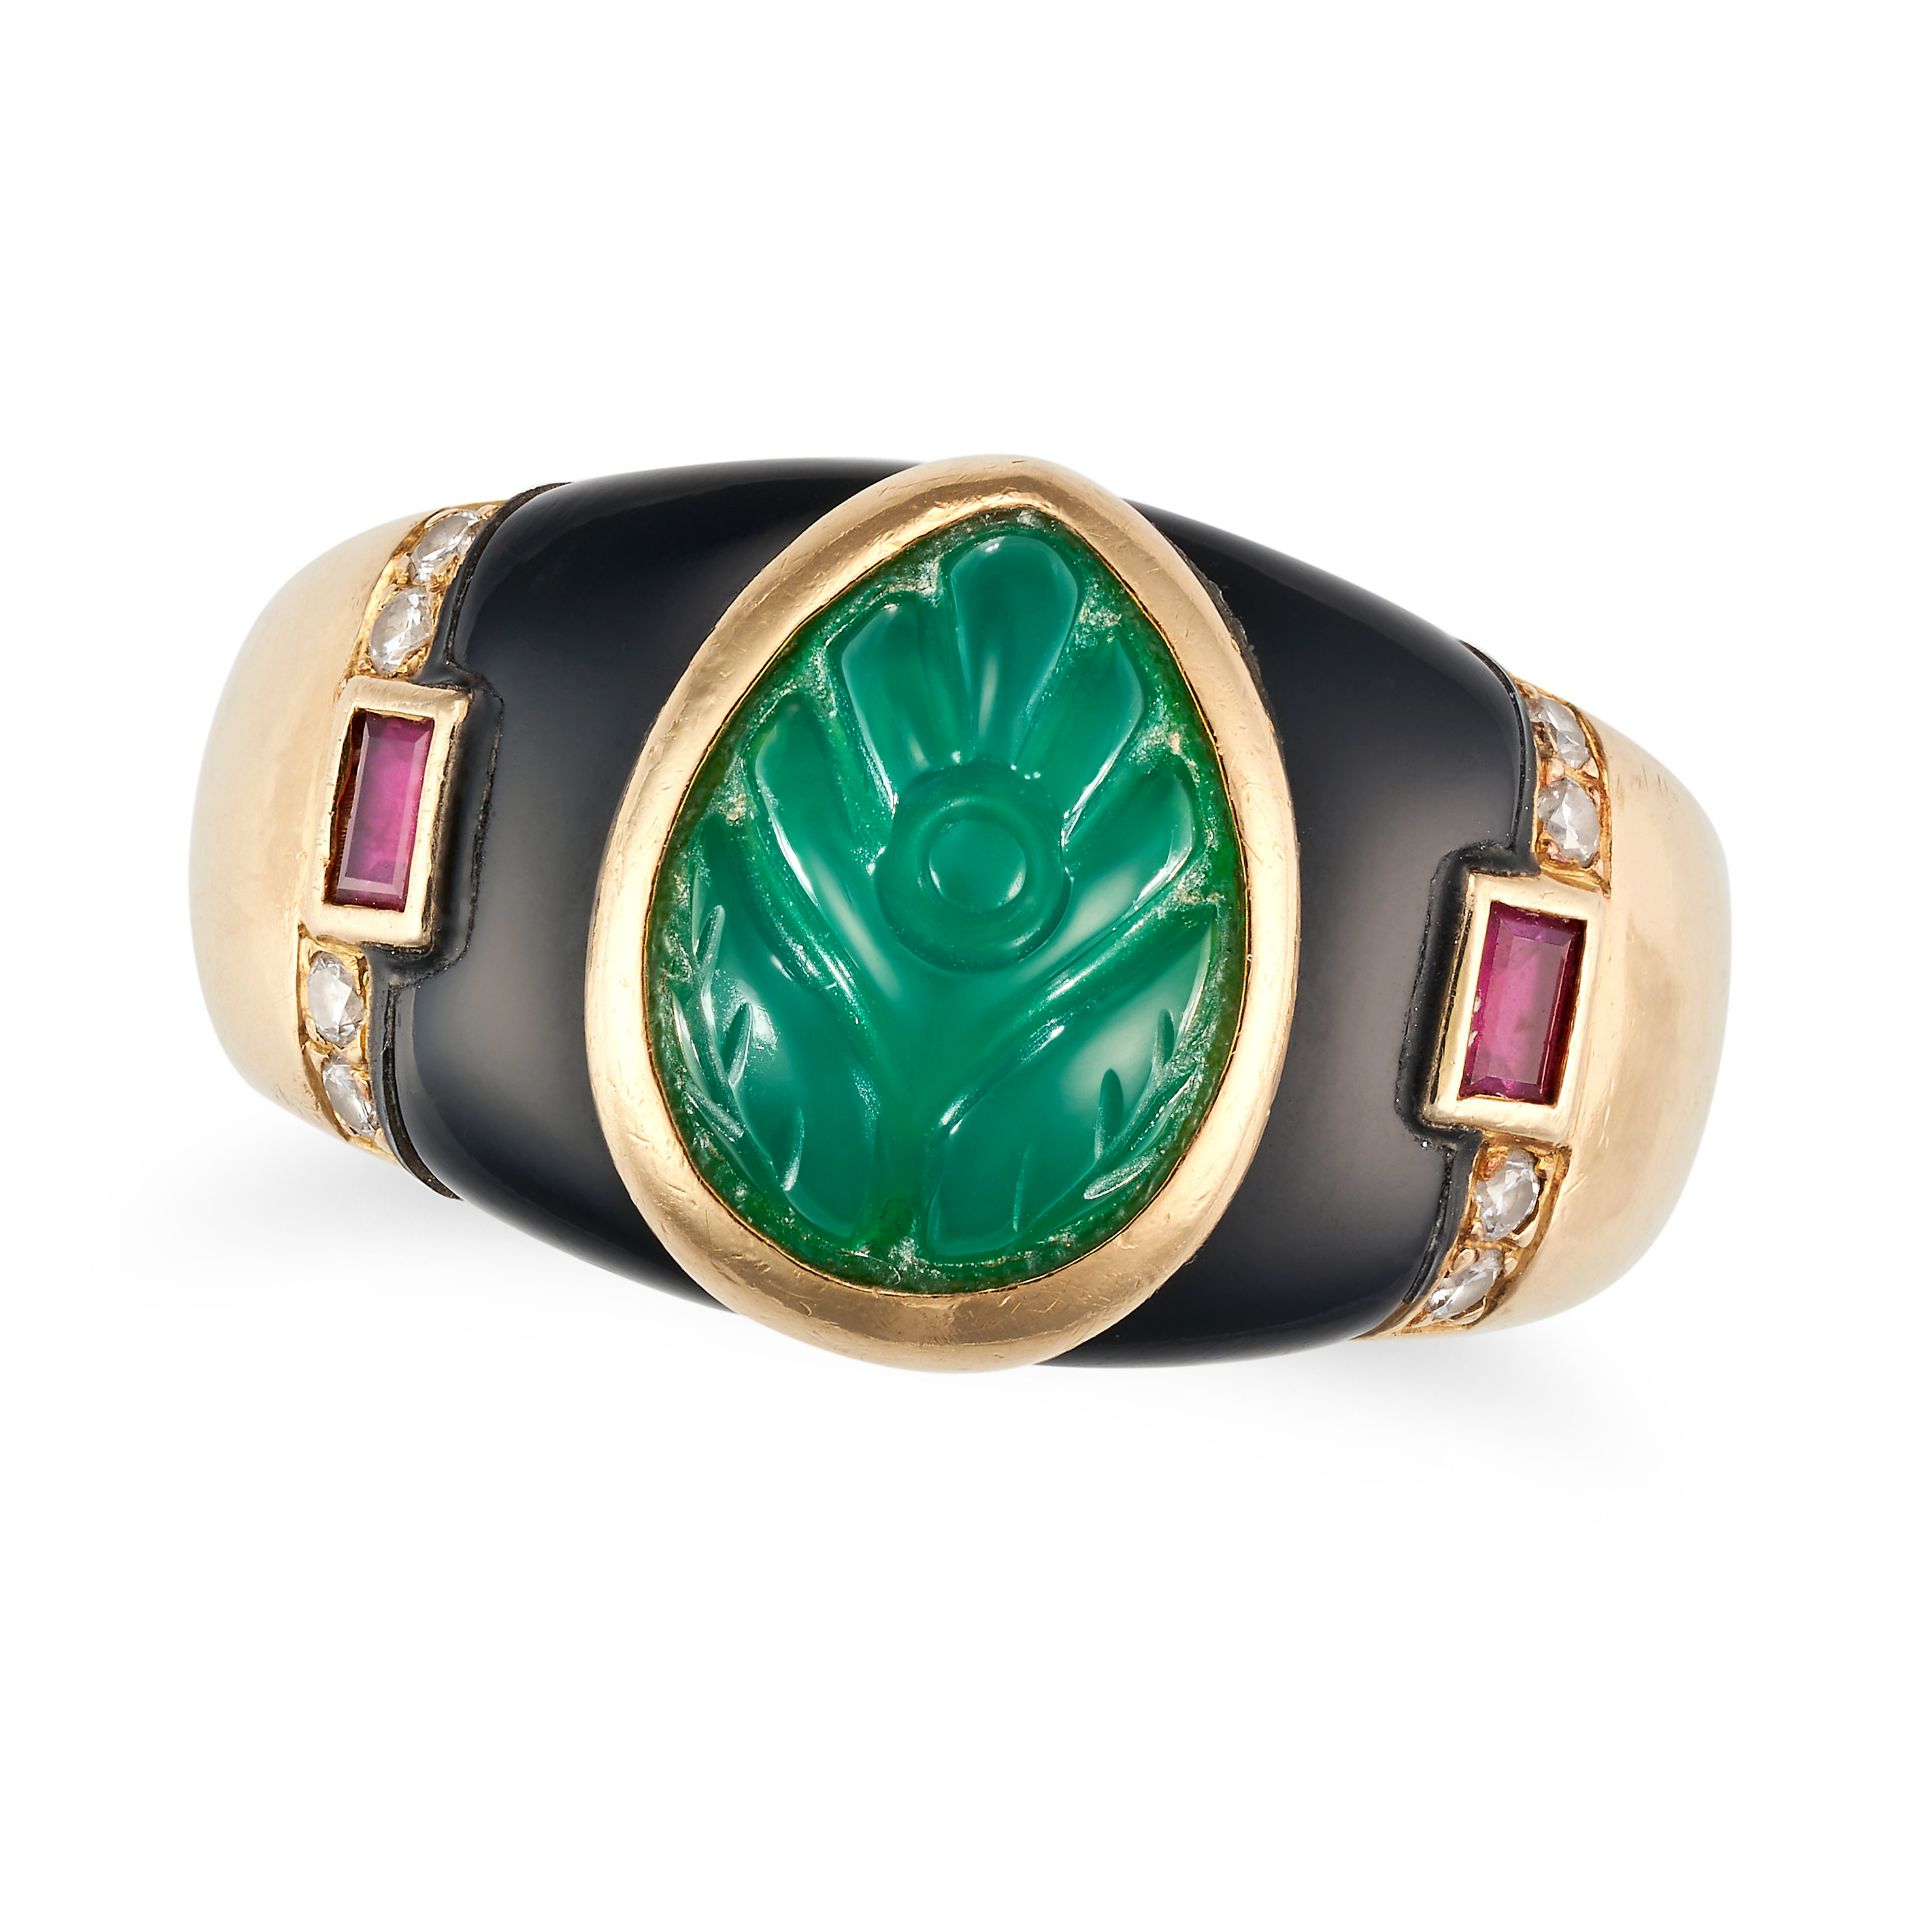 CARTIER, A VINTAGE CHRYSOPRASE, ONYX, RUBY AND DIAMOND DRESS RING in 18ct yellow gold, set with a...